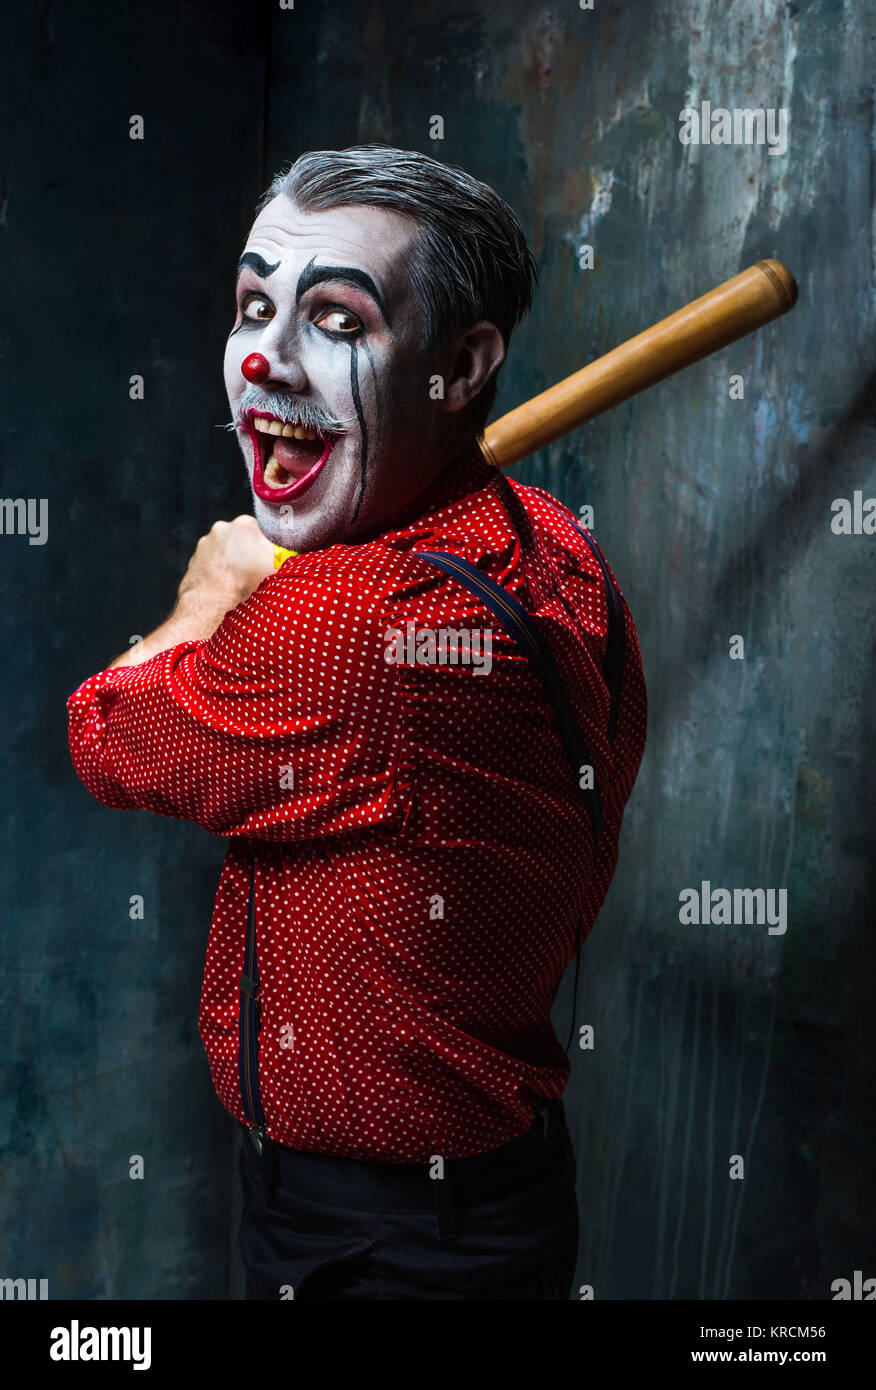 The scary clown and baseball-bat on dack background. Halloween concept Stock Photo